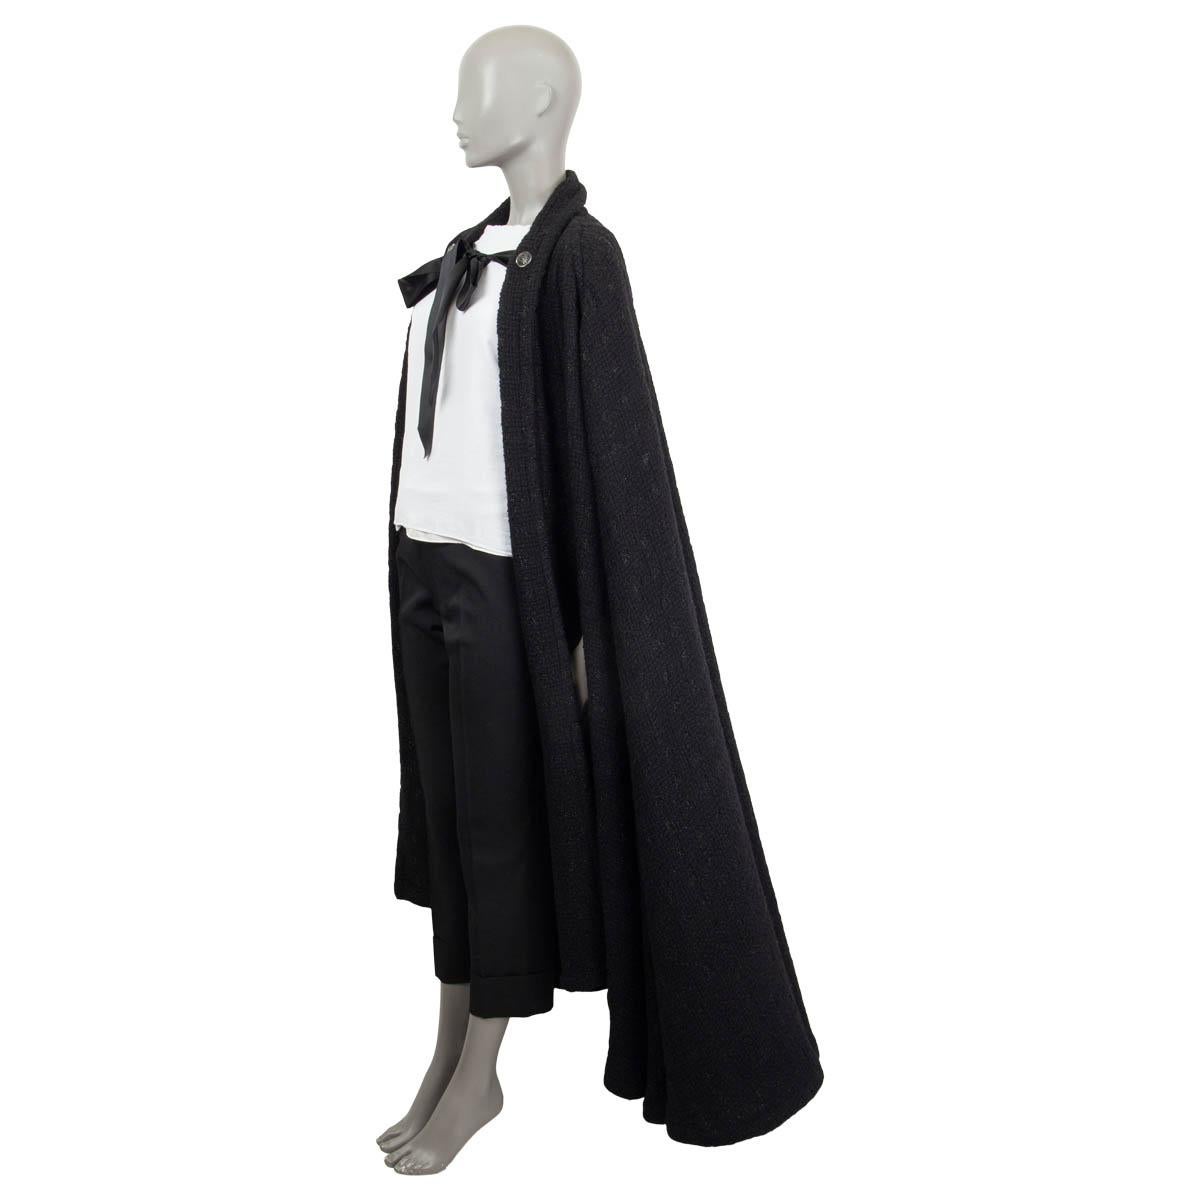 100% authentic Chanel Winter 2019 cape in black bouclé wool (94%), polyester metal (4%) and polyamide (2%) embellished with a black satin bow and two CC logo rhinestone buttons. Has been worn and is in excellent condition.